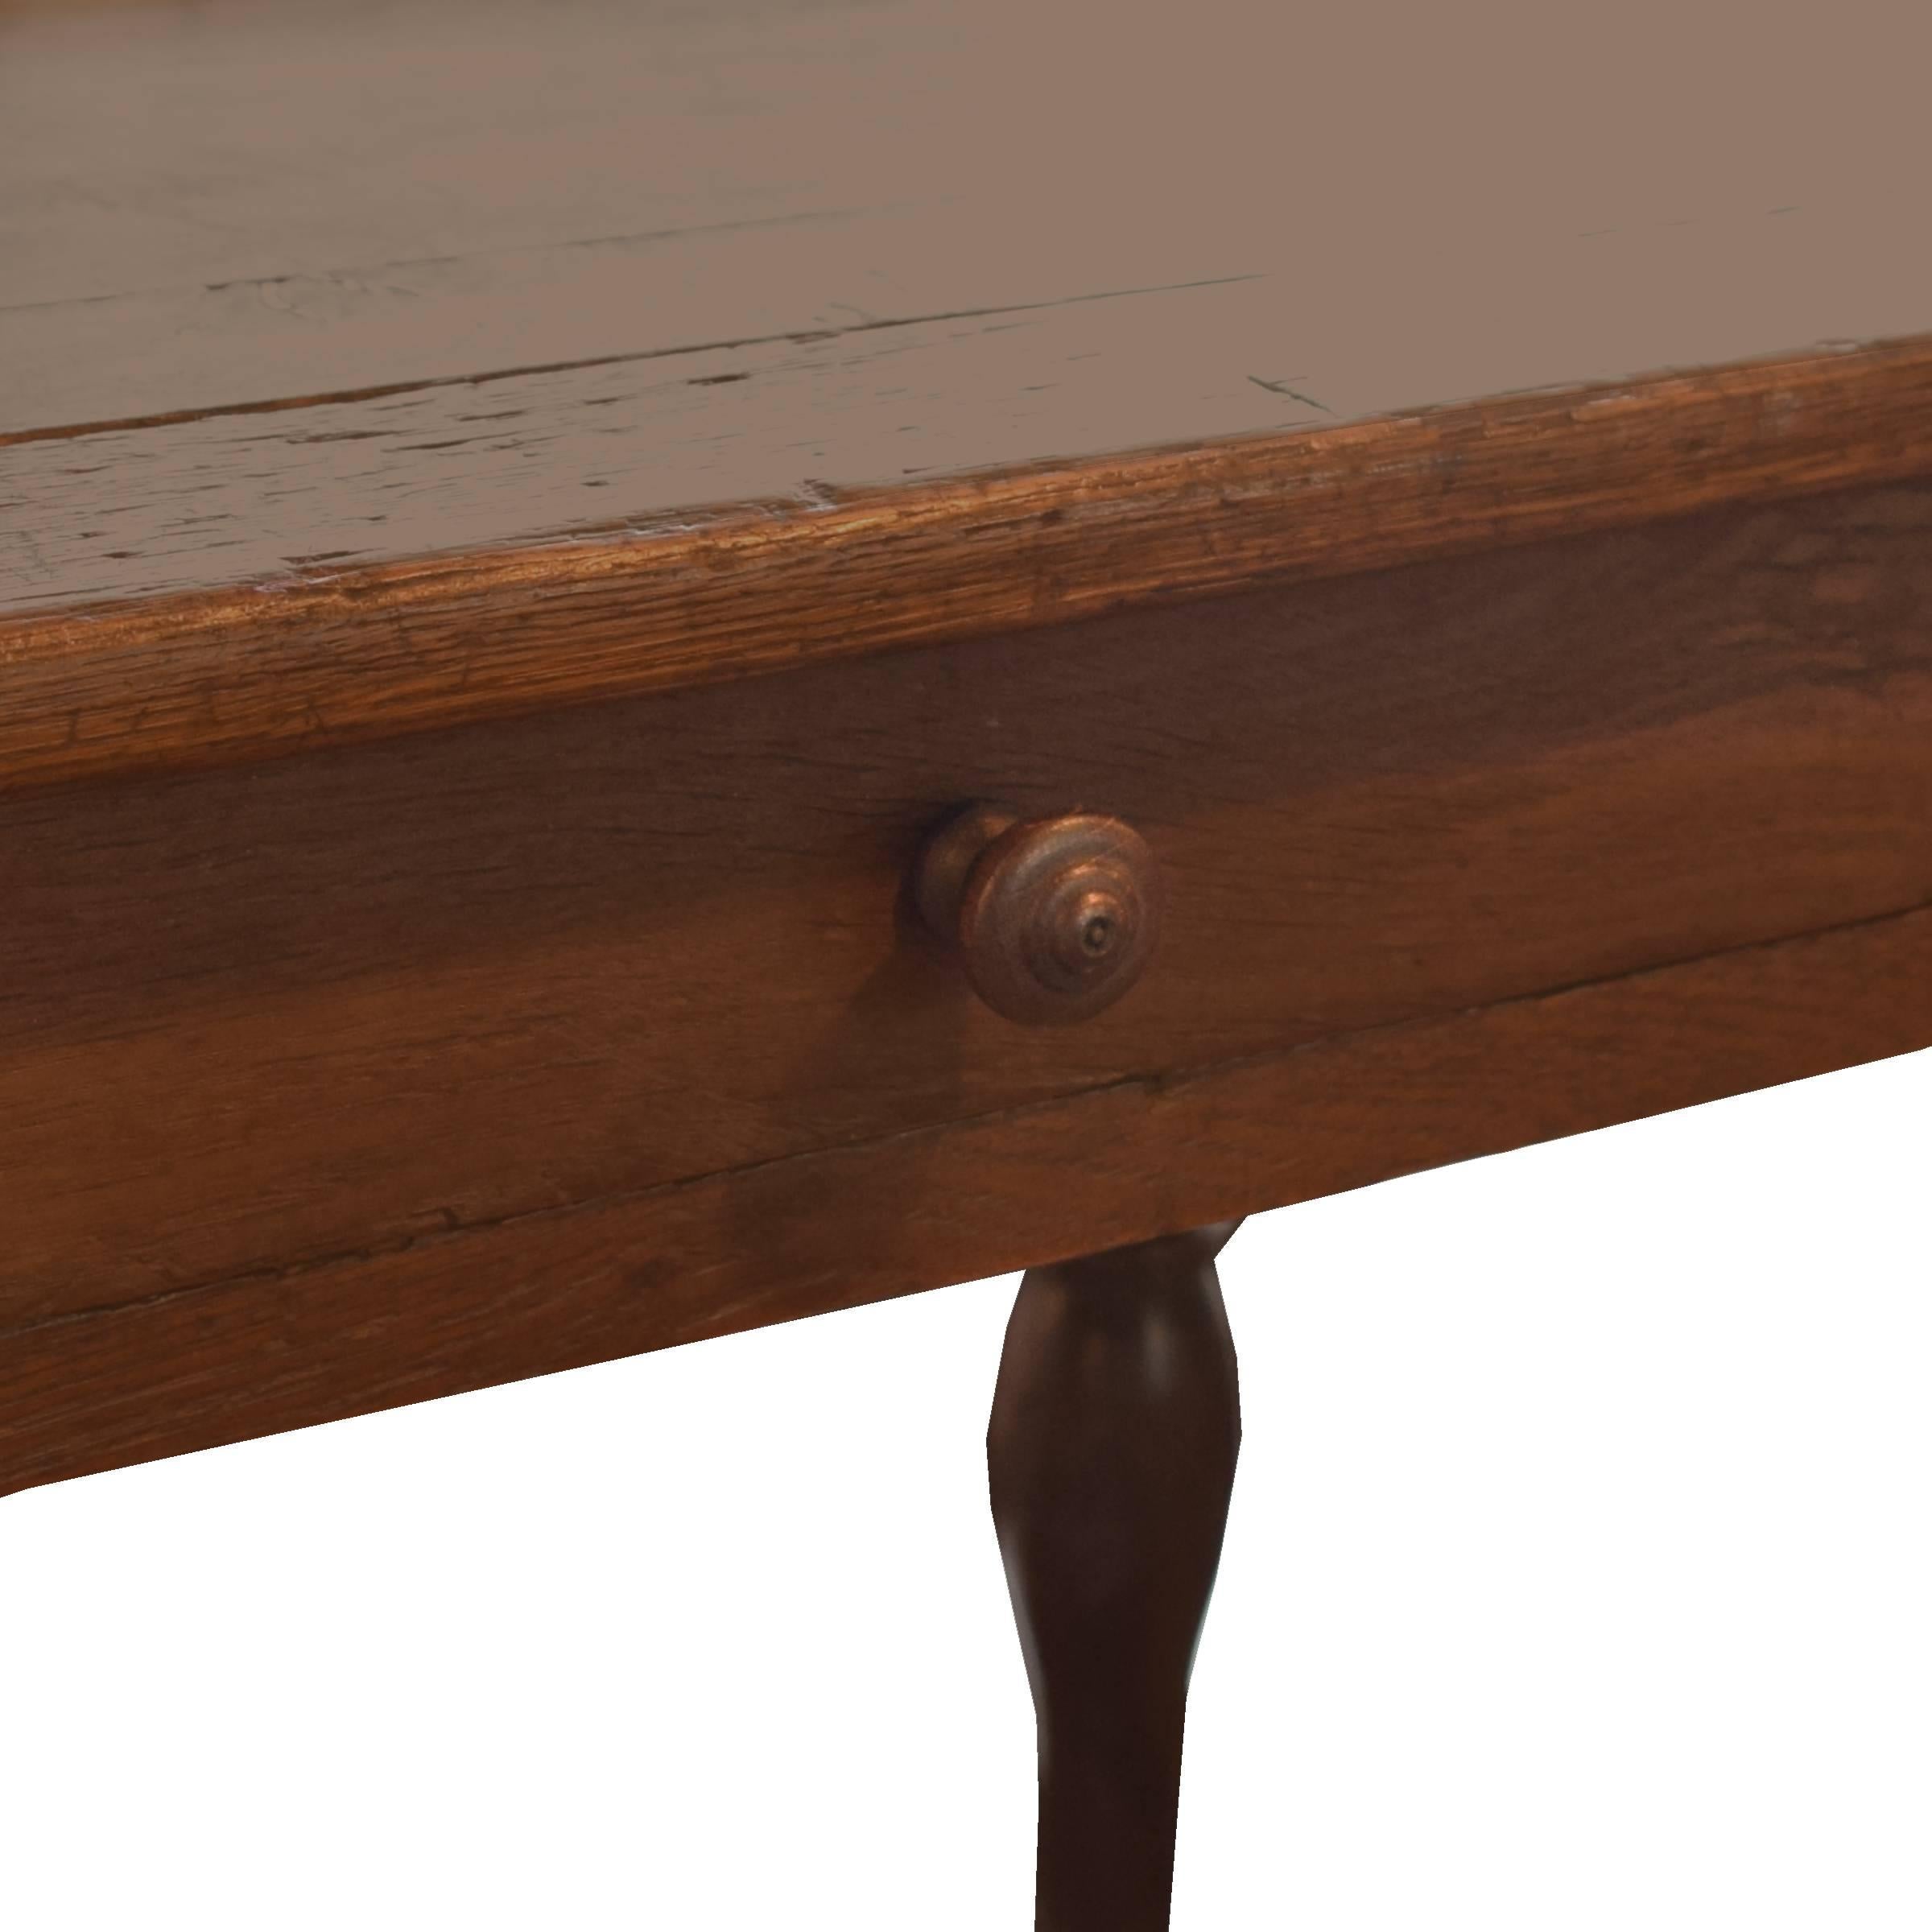 A great early 20th century French oak draper's table with a drawer, low shelf, and six turned legs.